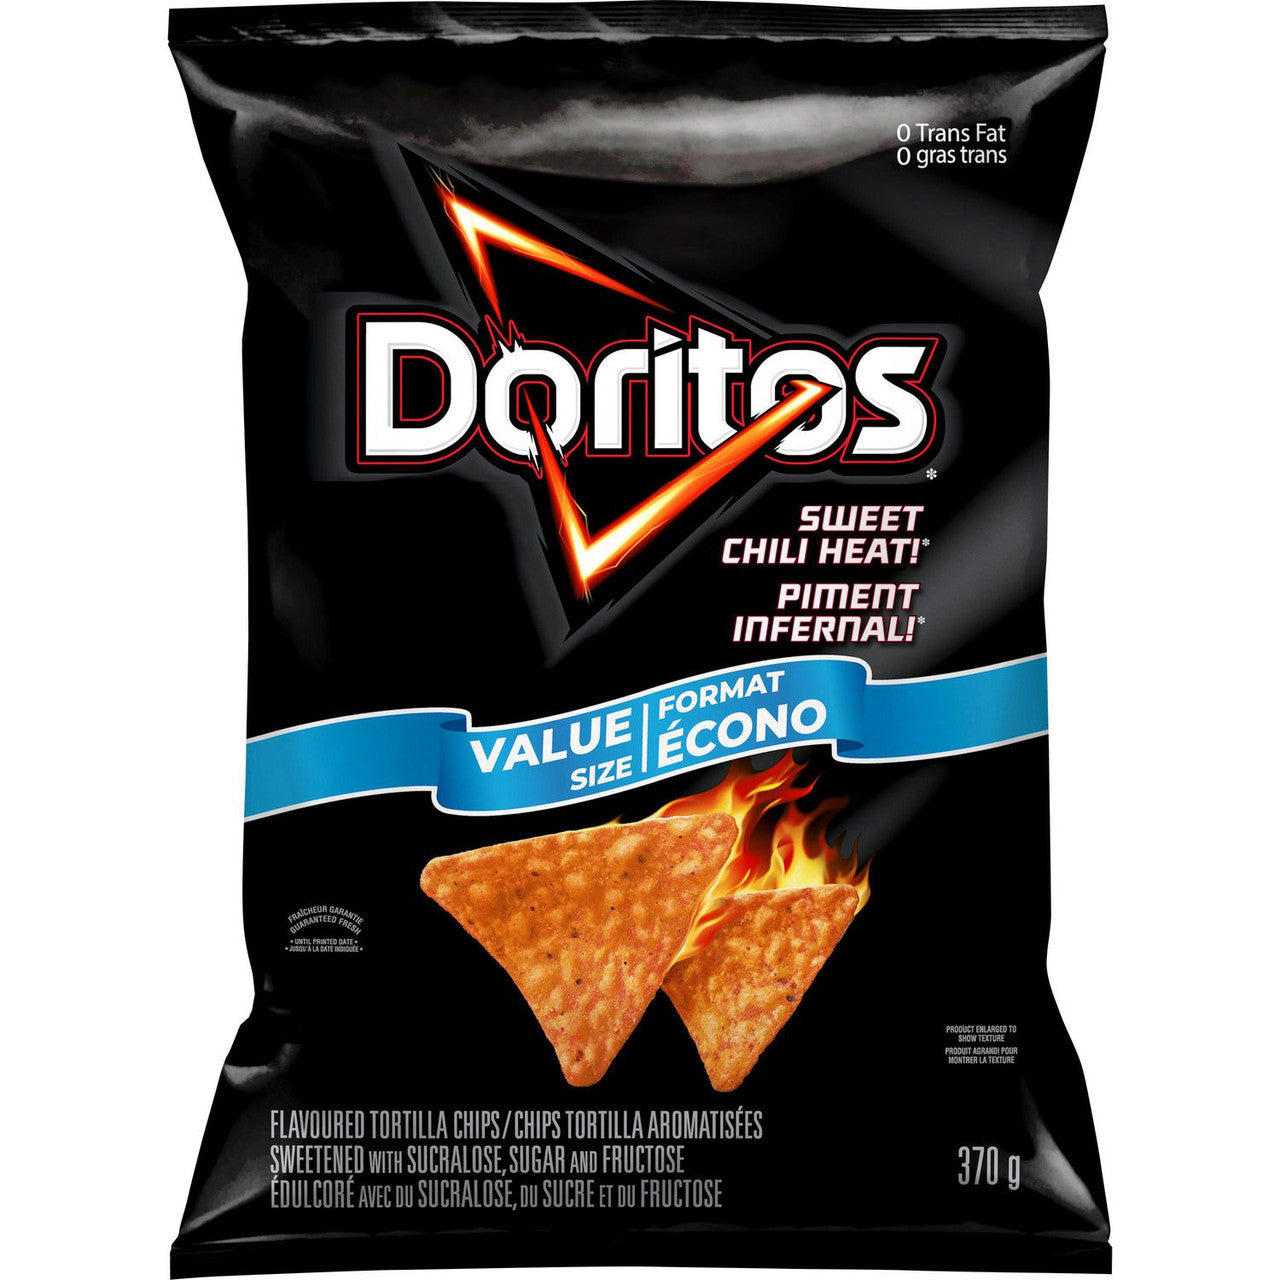 Doritos Sweet Chili Heat Tortilla Chips, 370g/13.1 oz., Value Size Bag, {Imported from Canada}